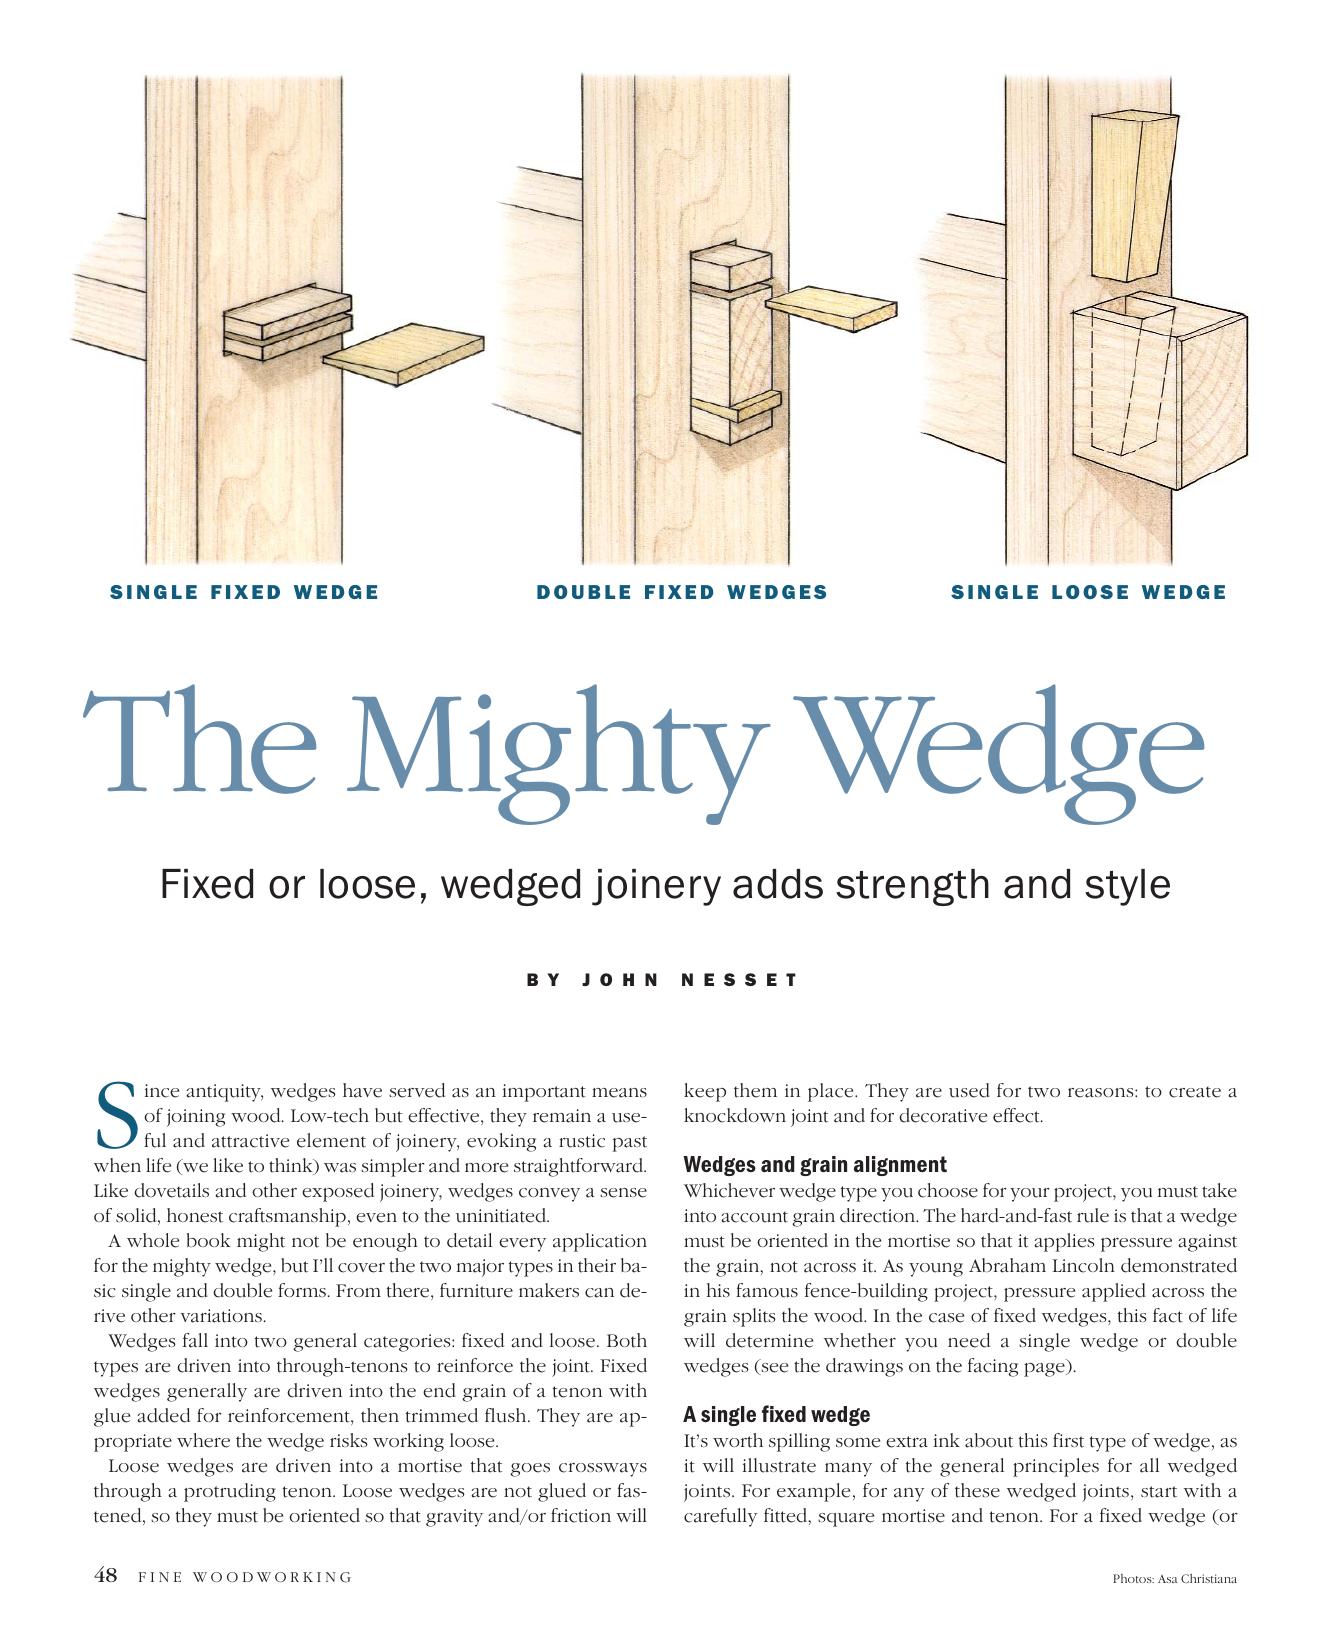 The Mighty Wedge by John Nesset